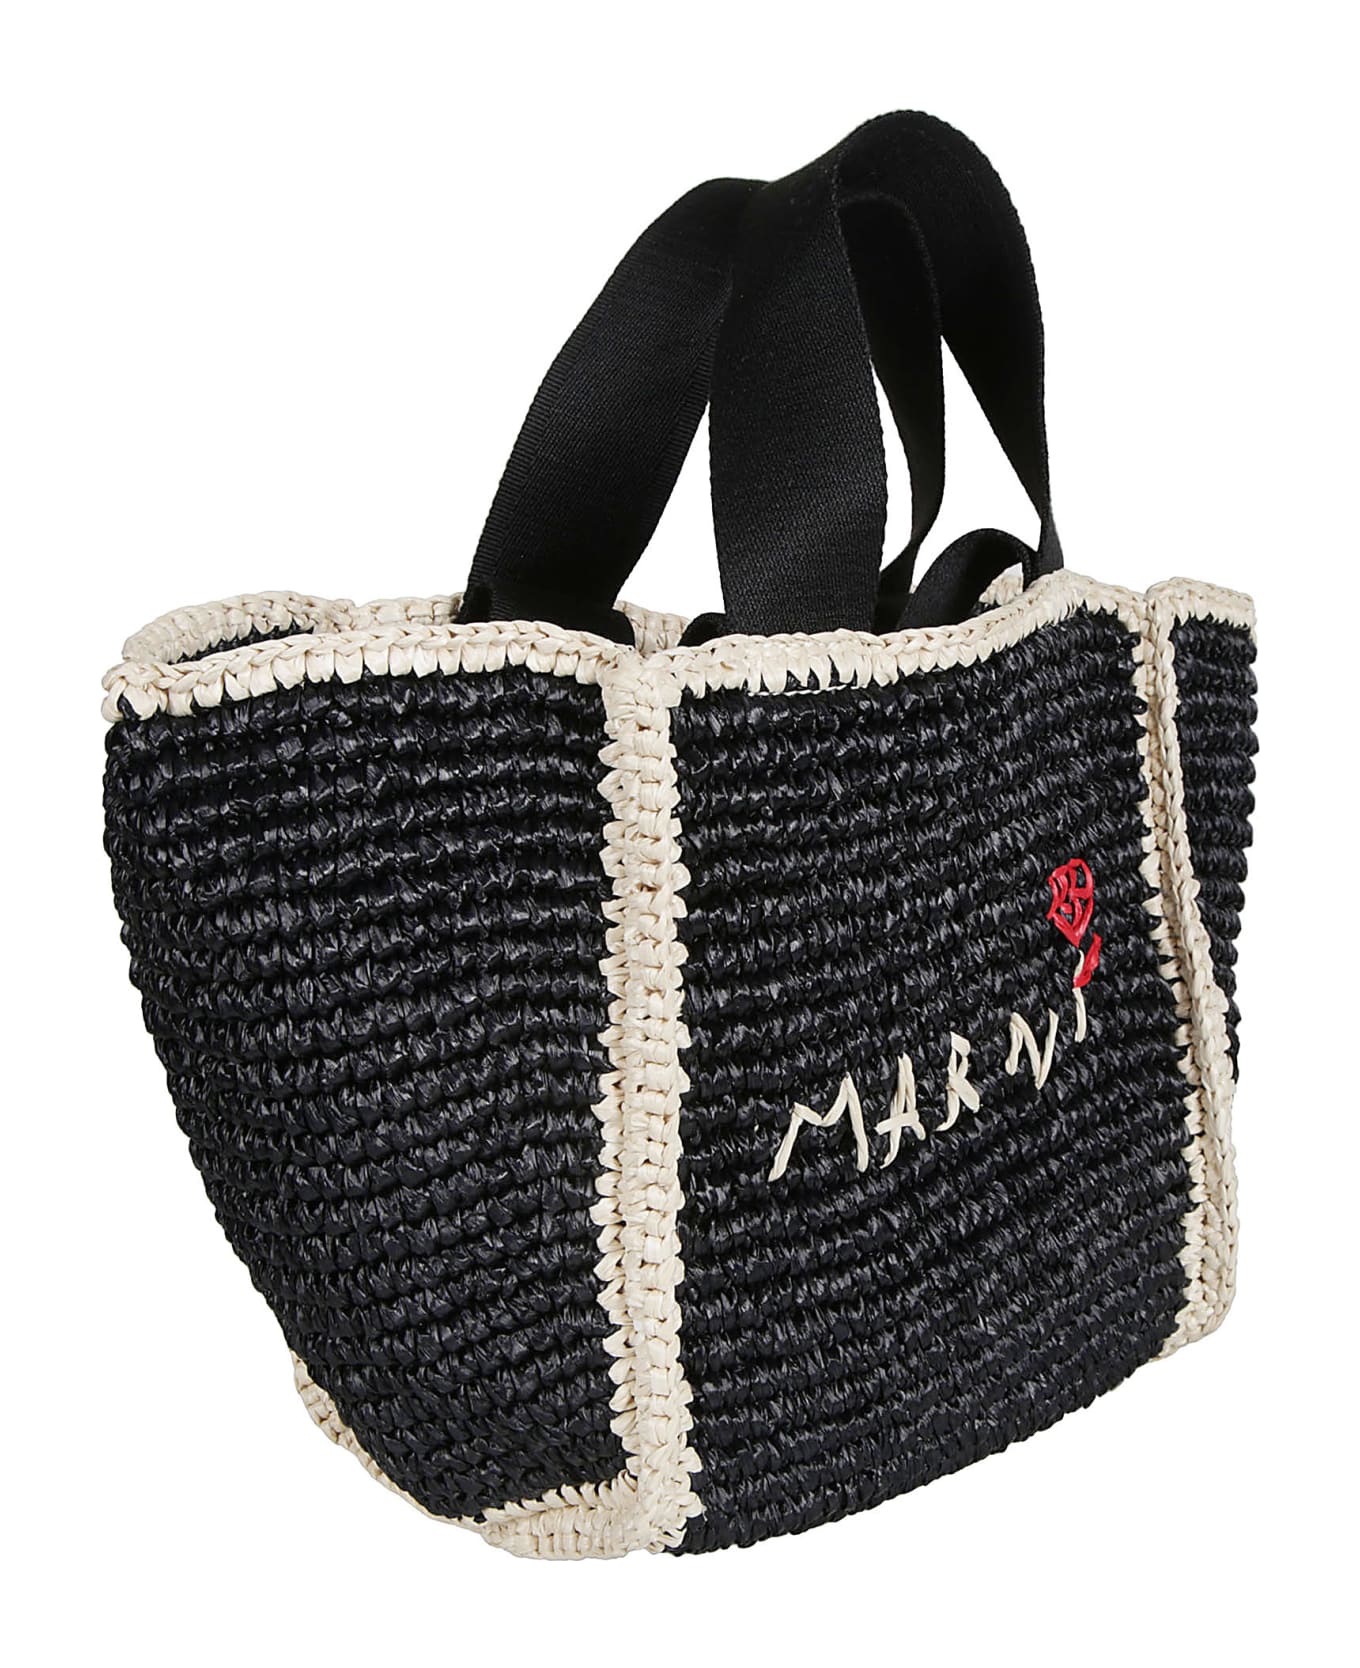 Marni Logo Embroidered Woven Top Handle Tote - Black/White トートバッグ